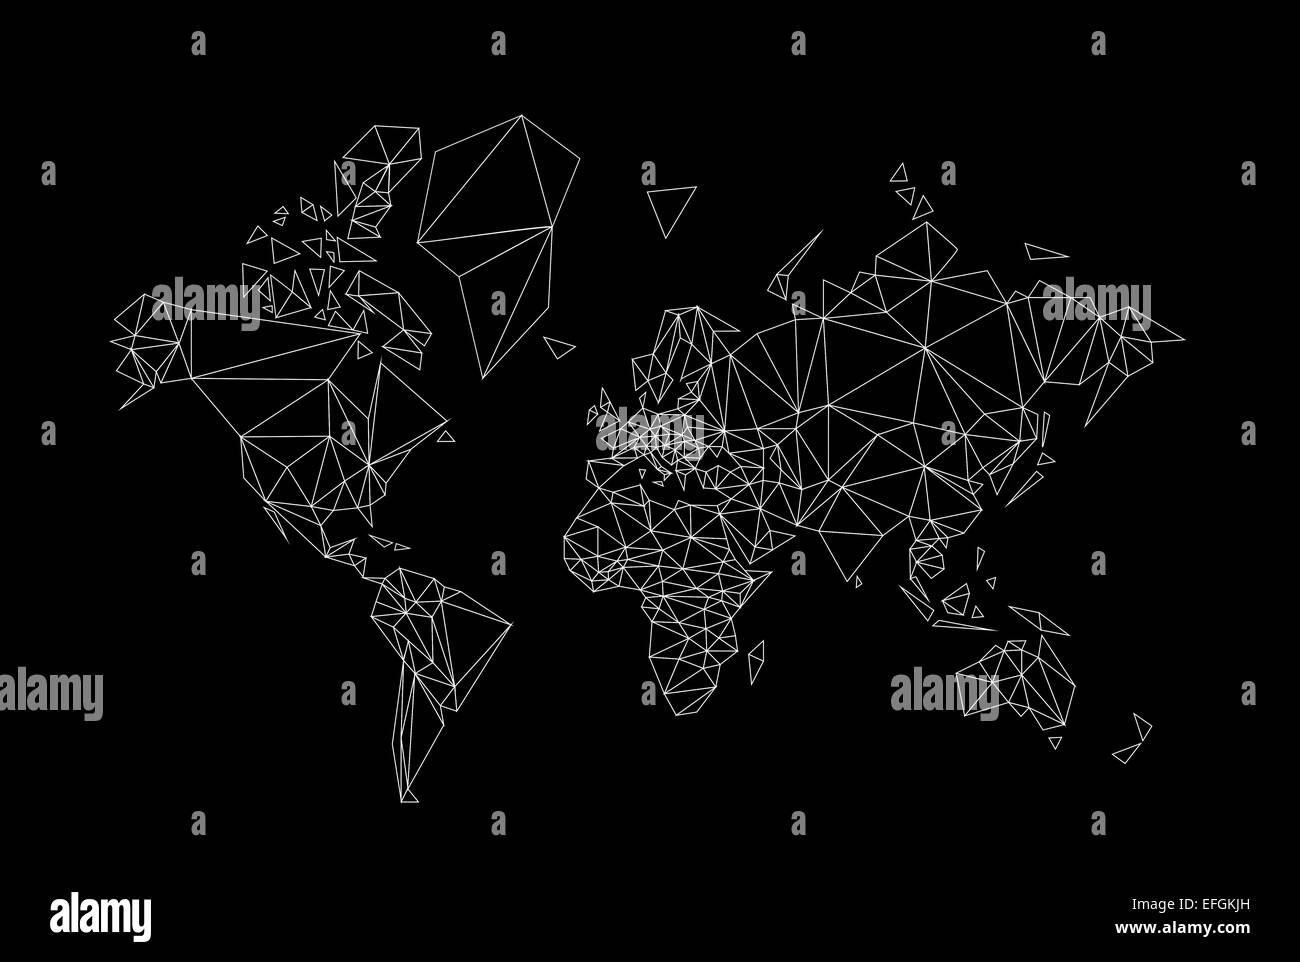 black and white world map low poly illustration Stock Photo